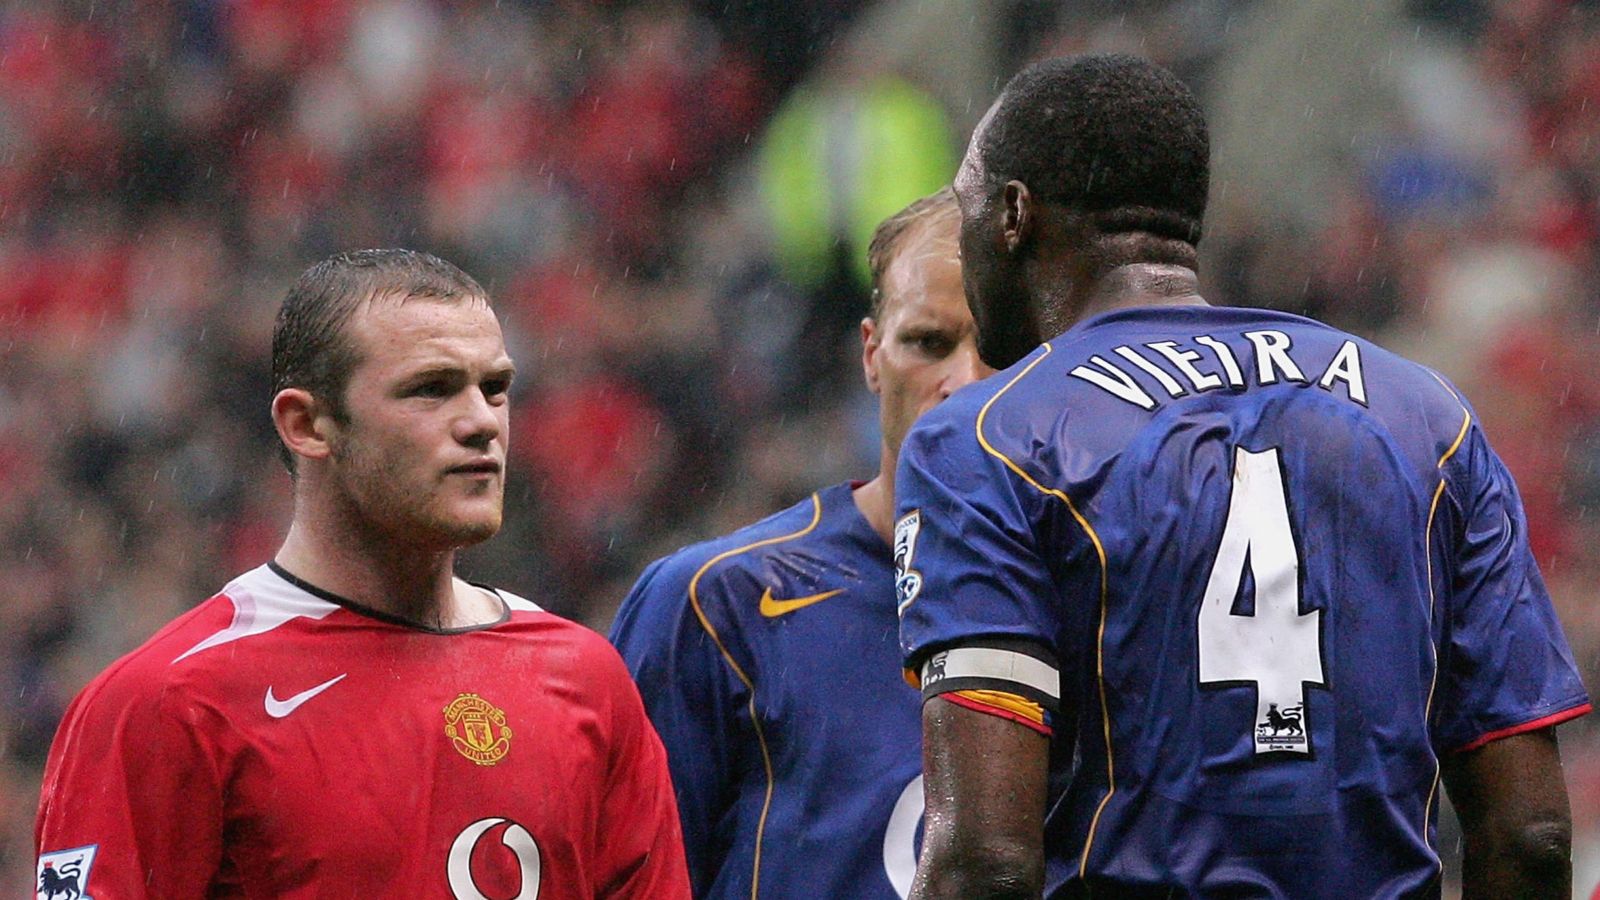 Manchester United - Millwall 2004